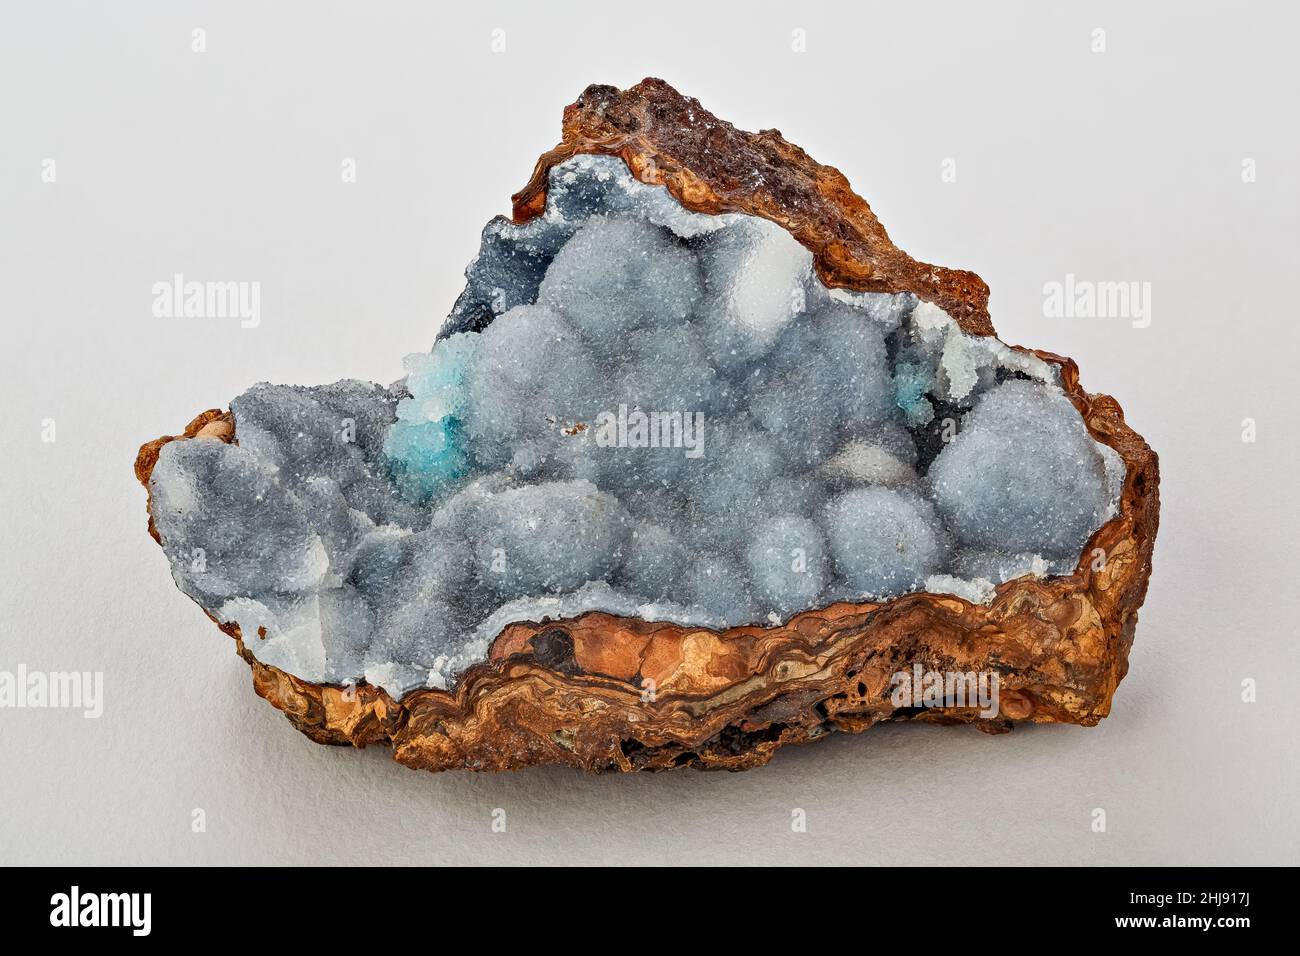 Encrustation of quartz crystals on a base of limonite, hidden in a geode Stock Photo